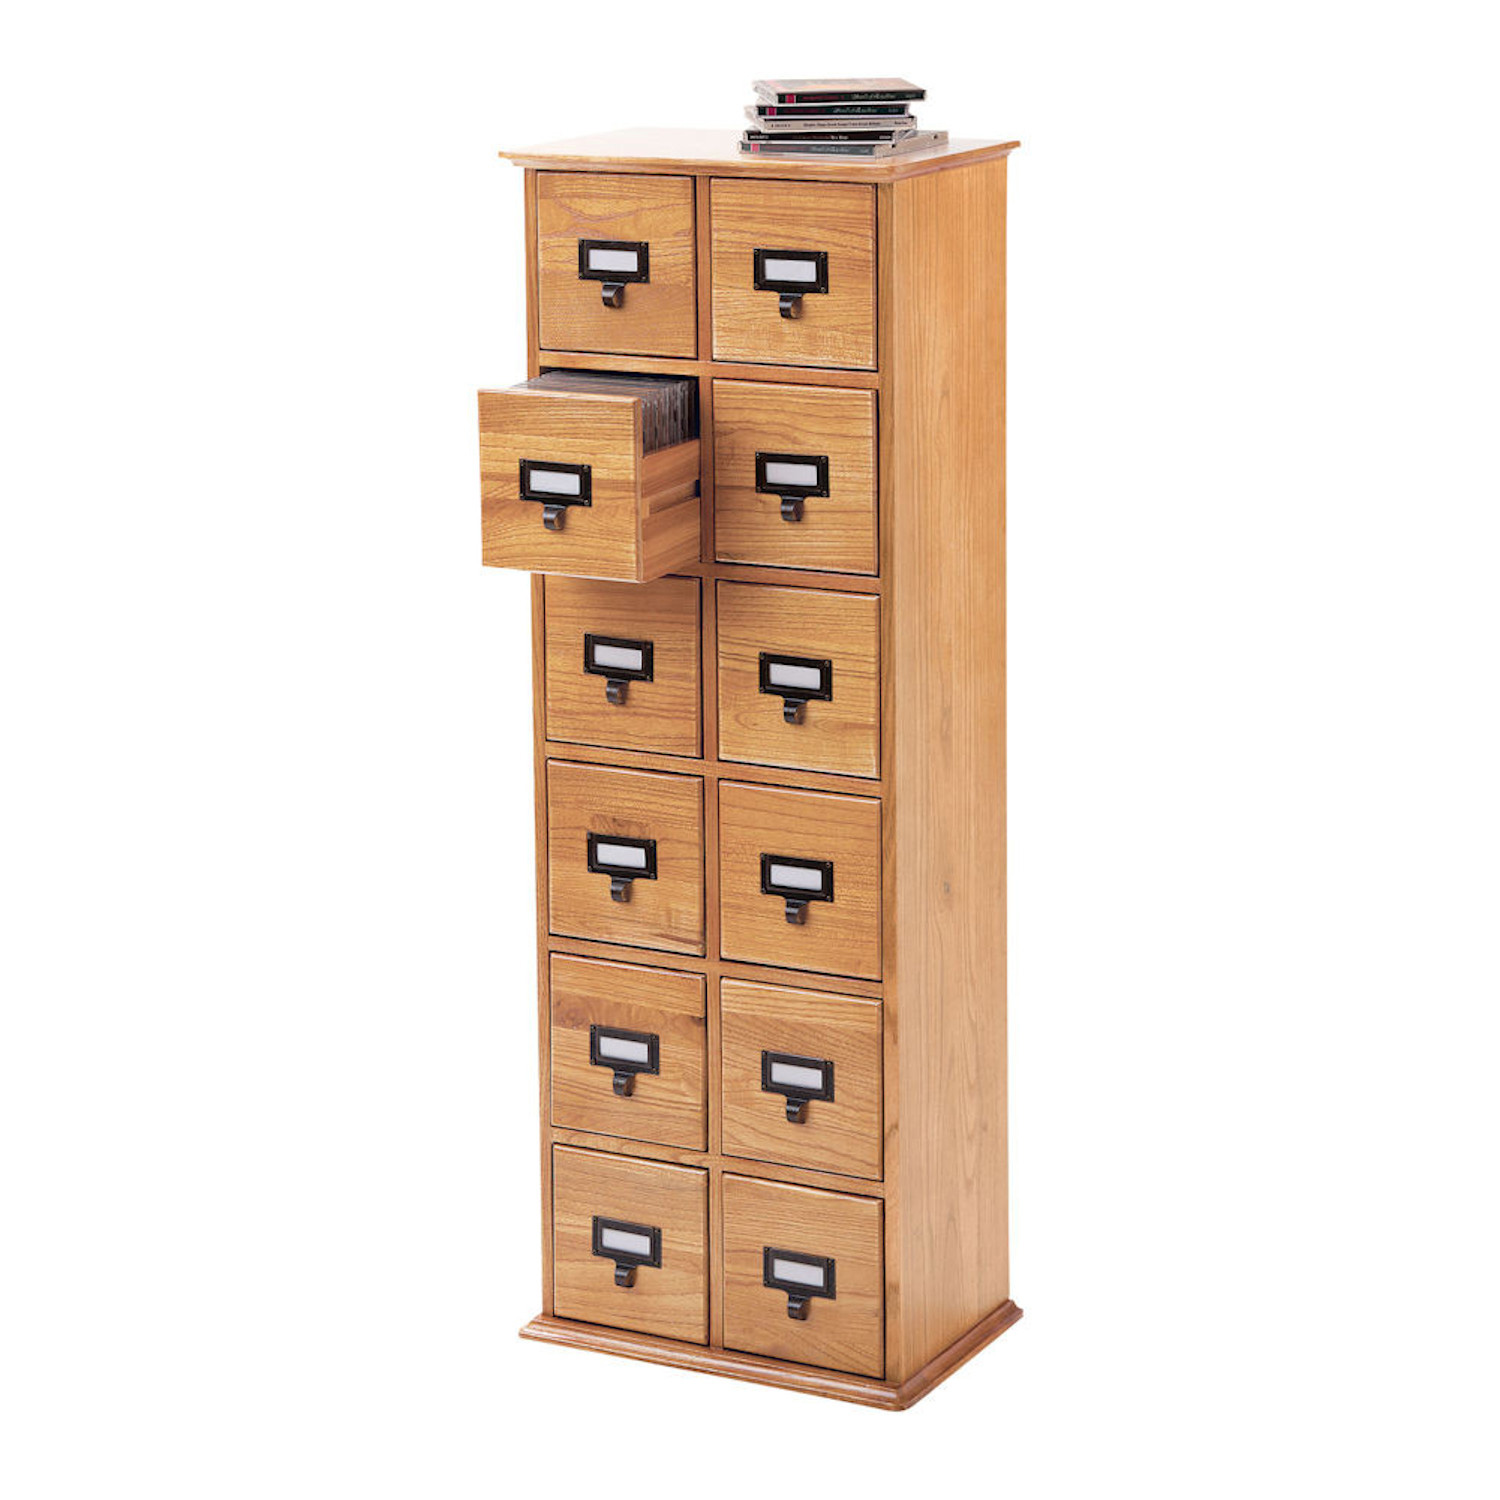 Library Cd Storage Cabinet - 12 Drawers | Shop.Pbs.Org